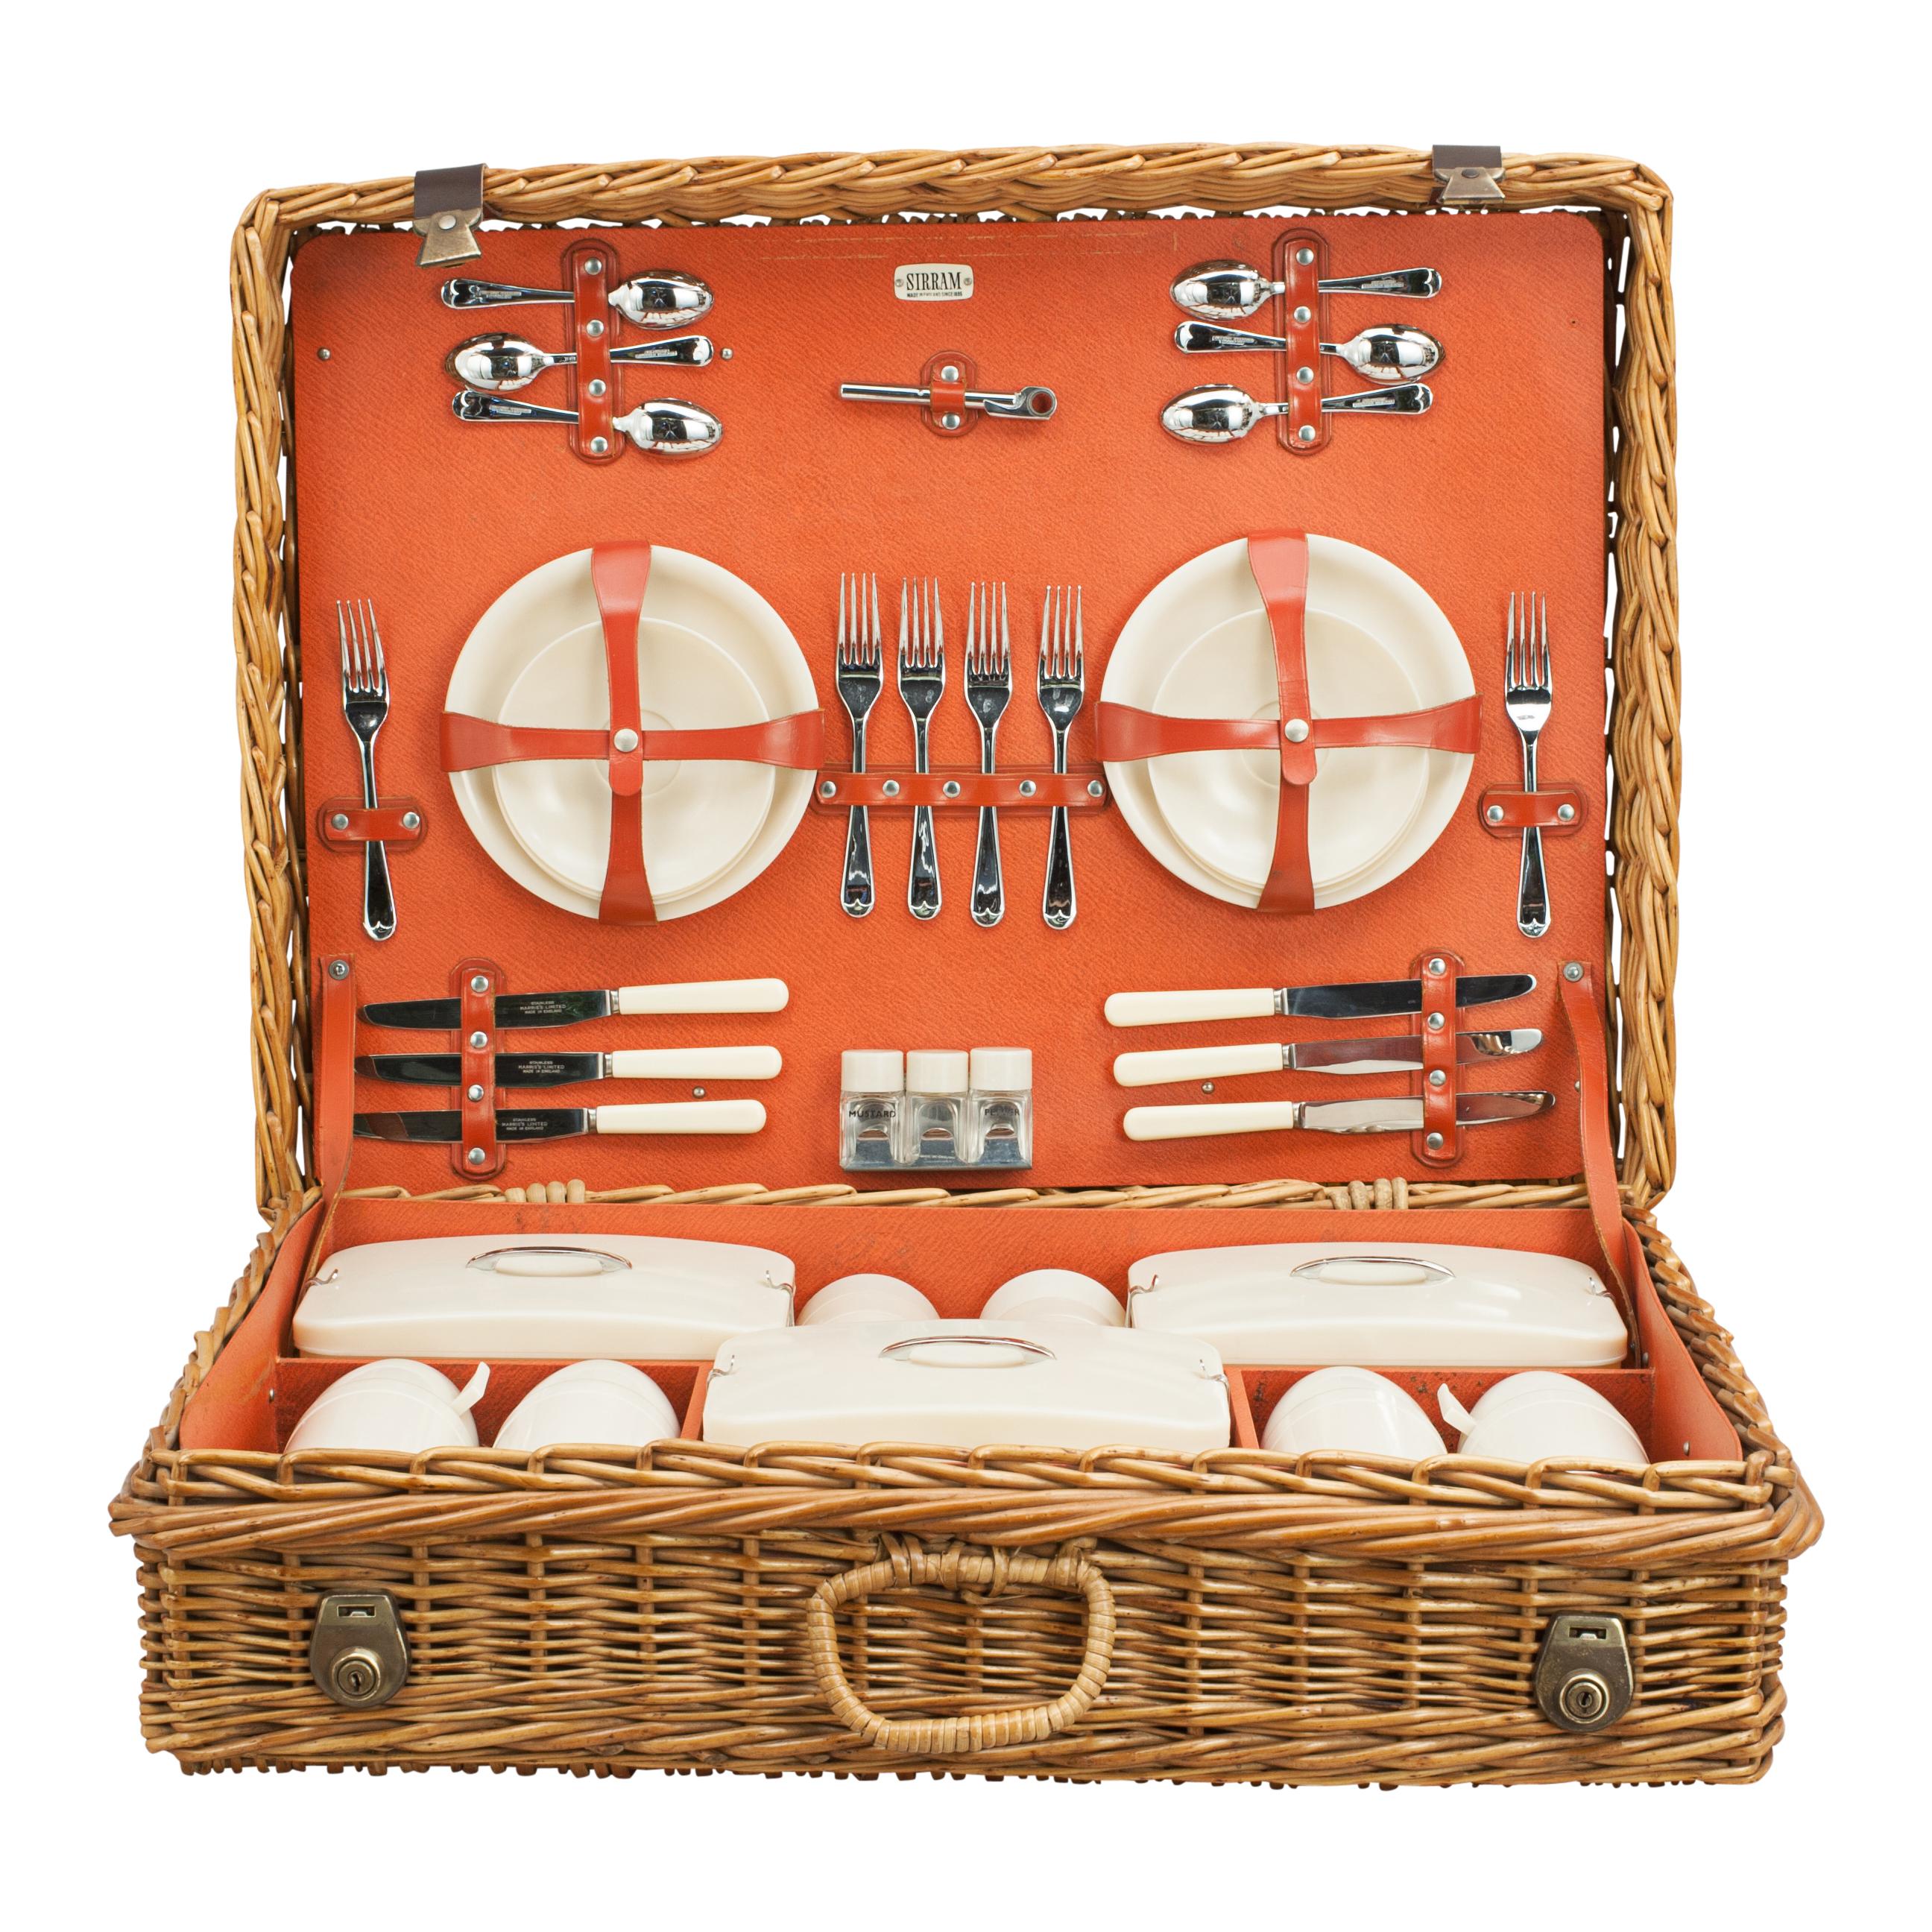 Vintage 'Sirram' picnic set.
A wonderful 'Sirram' six-person picnic set in a neat wicker basket. The case is with two brass locks and catches on leather straps and a single wicker carry handle. The contents are held in place by an internal